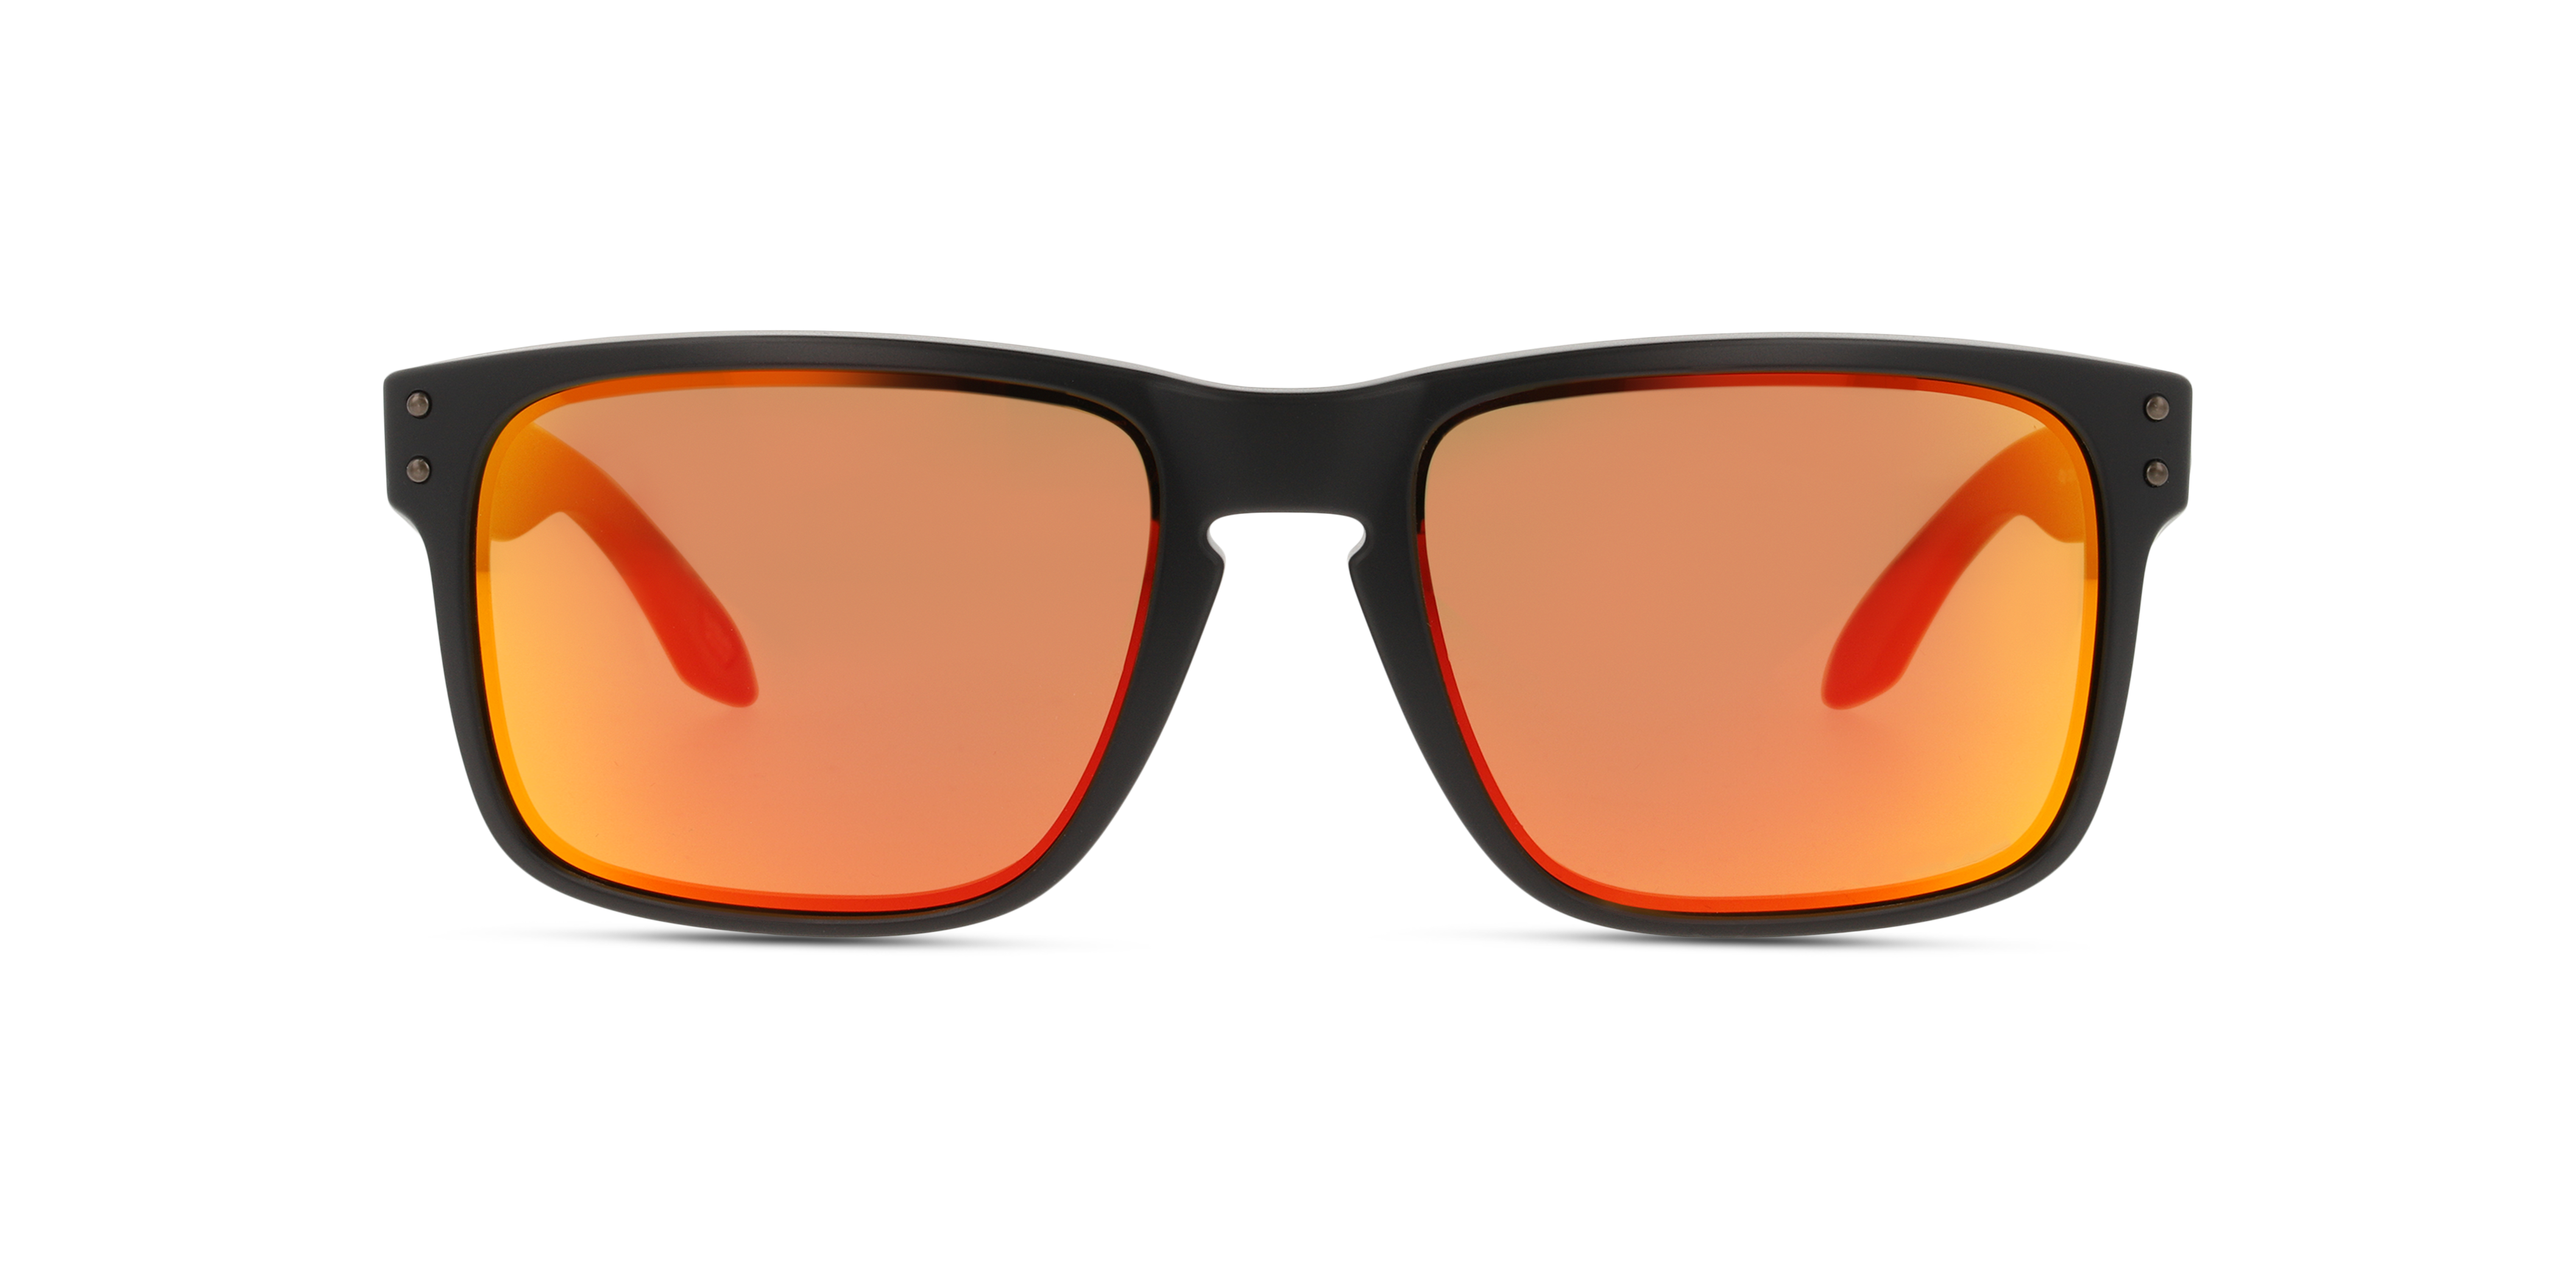 [products.image.front] Oakley OO9102